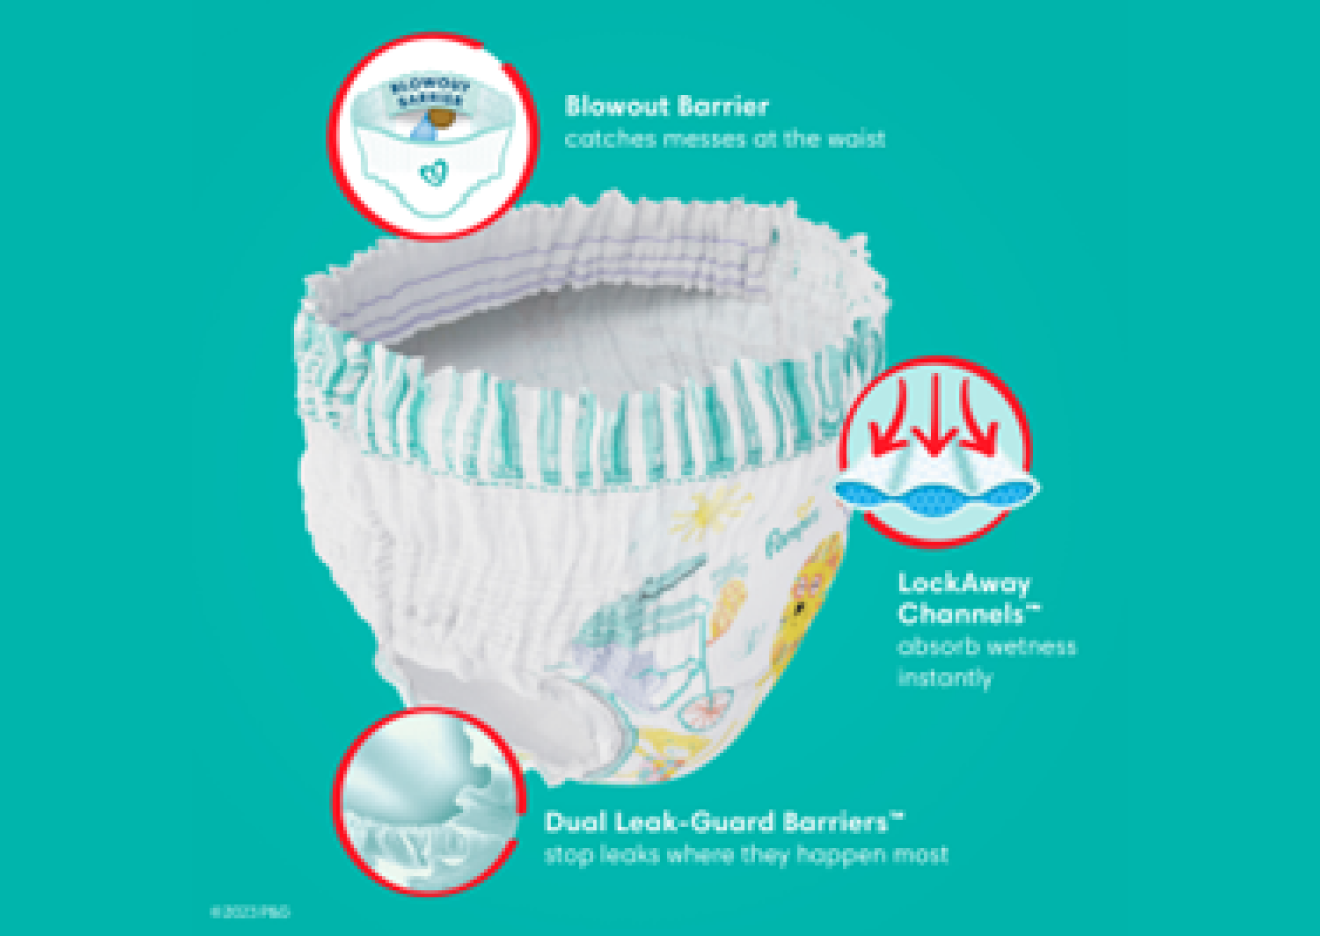 Pampers® Cruisers 360° Pants | Pampers